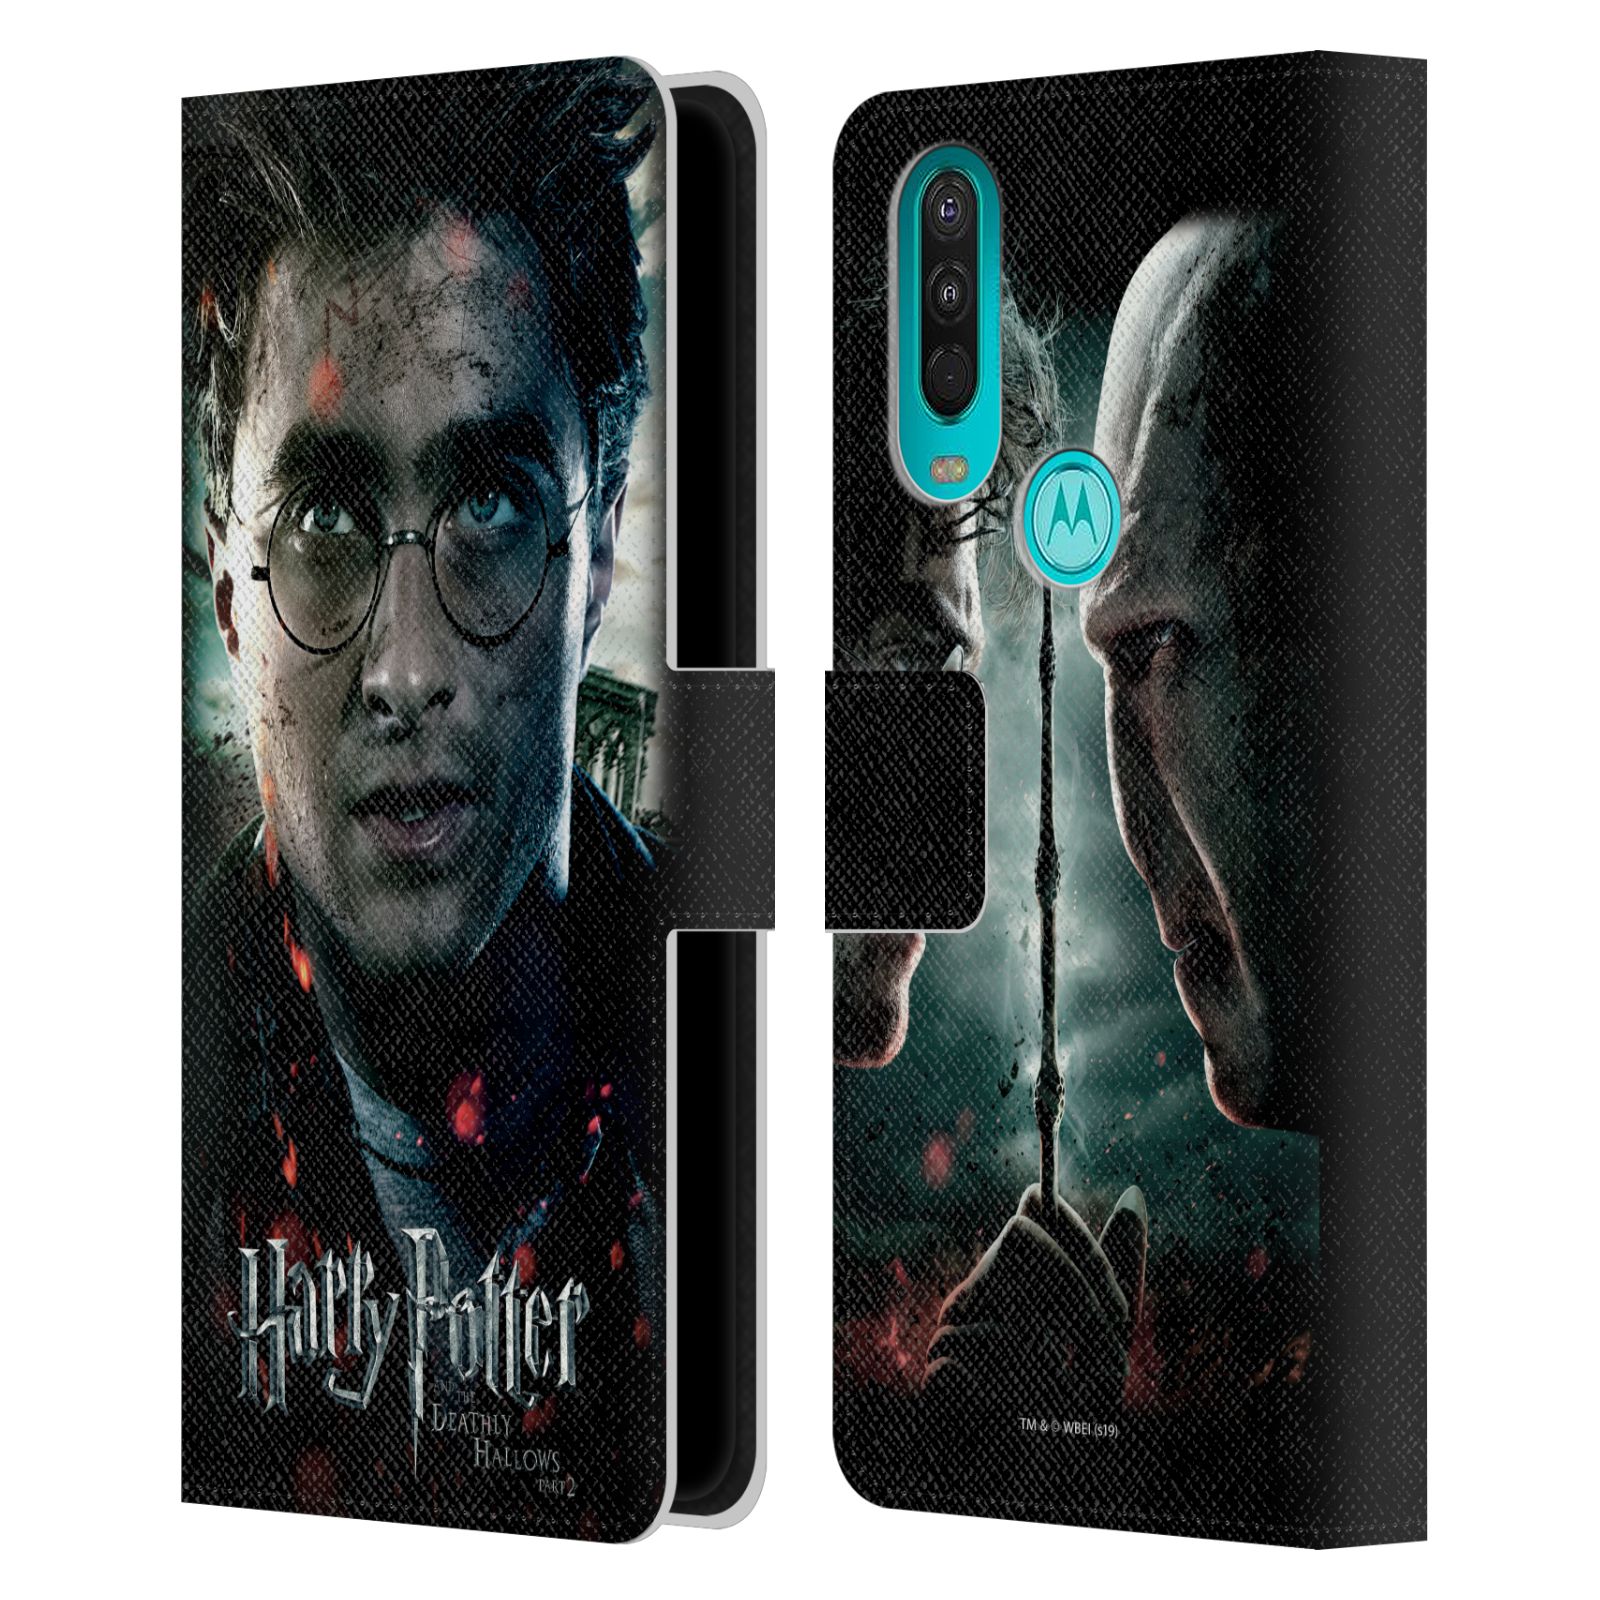 Pouzdro HEAD CASE na mobil Motorola One Action - Harry Potter a Voldemort